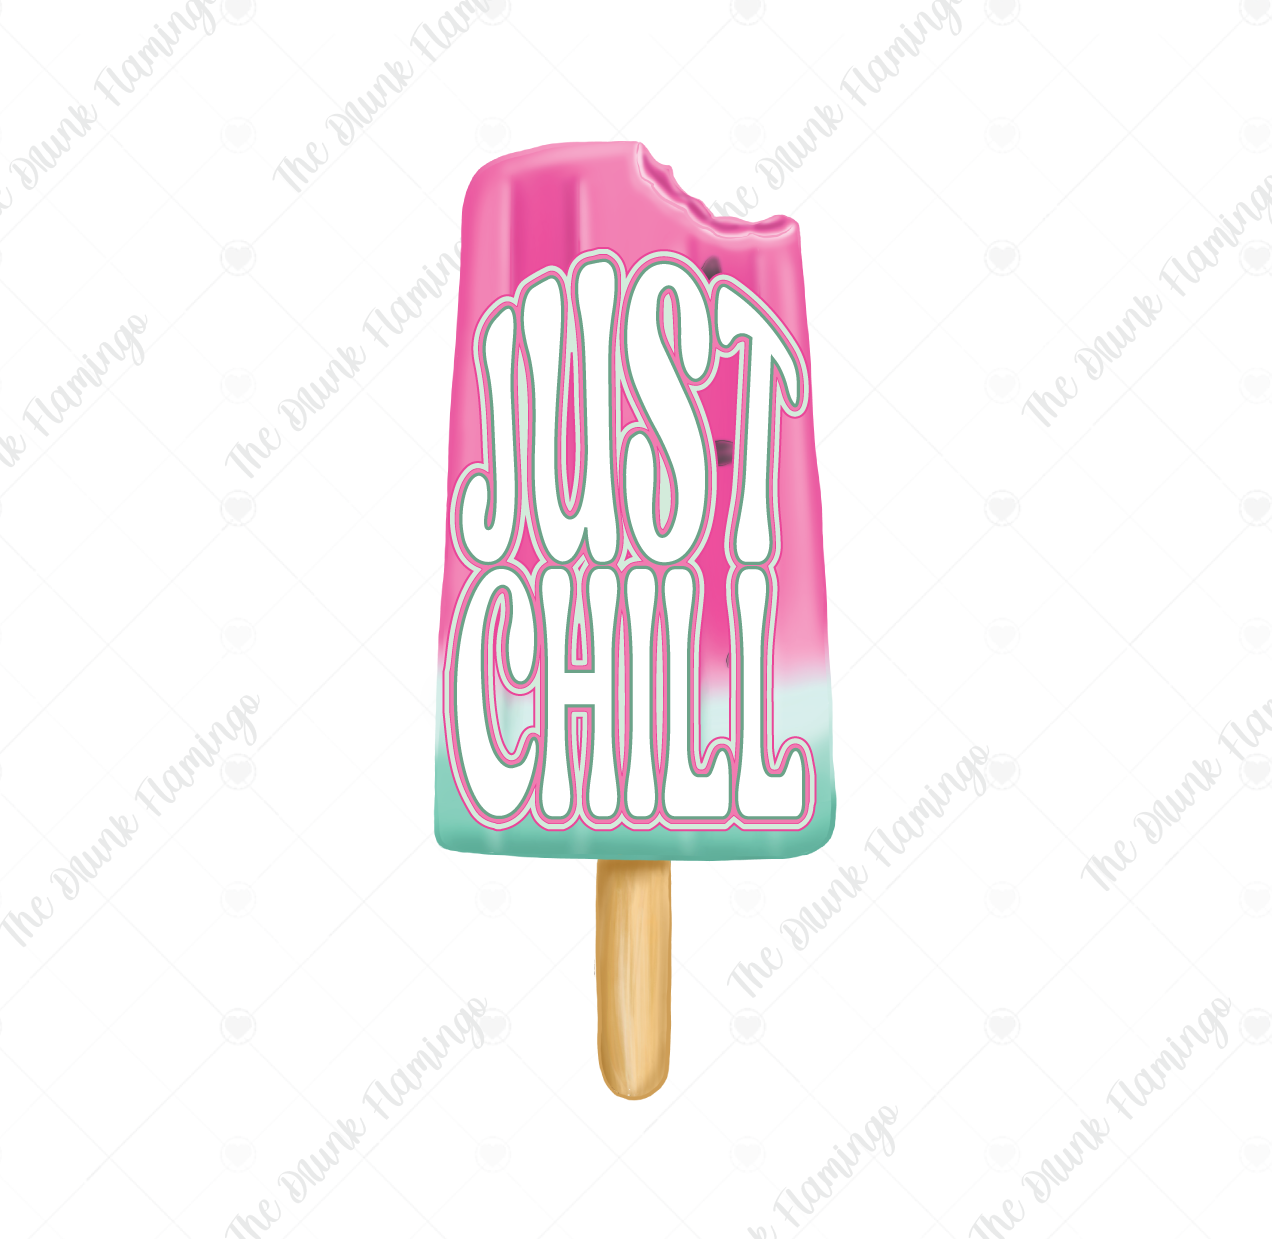 162- Just Chill WHITE decal